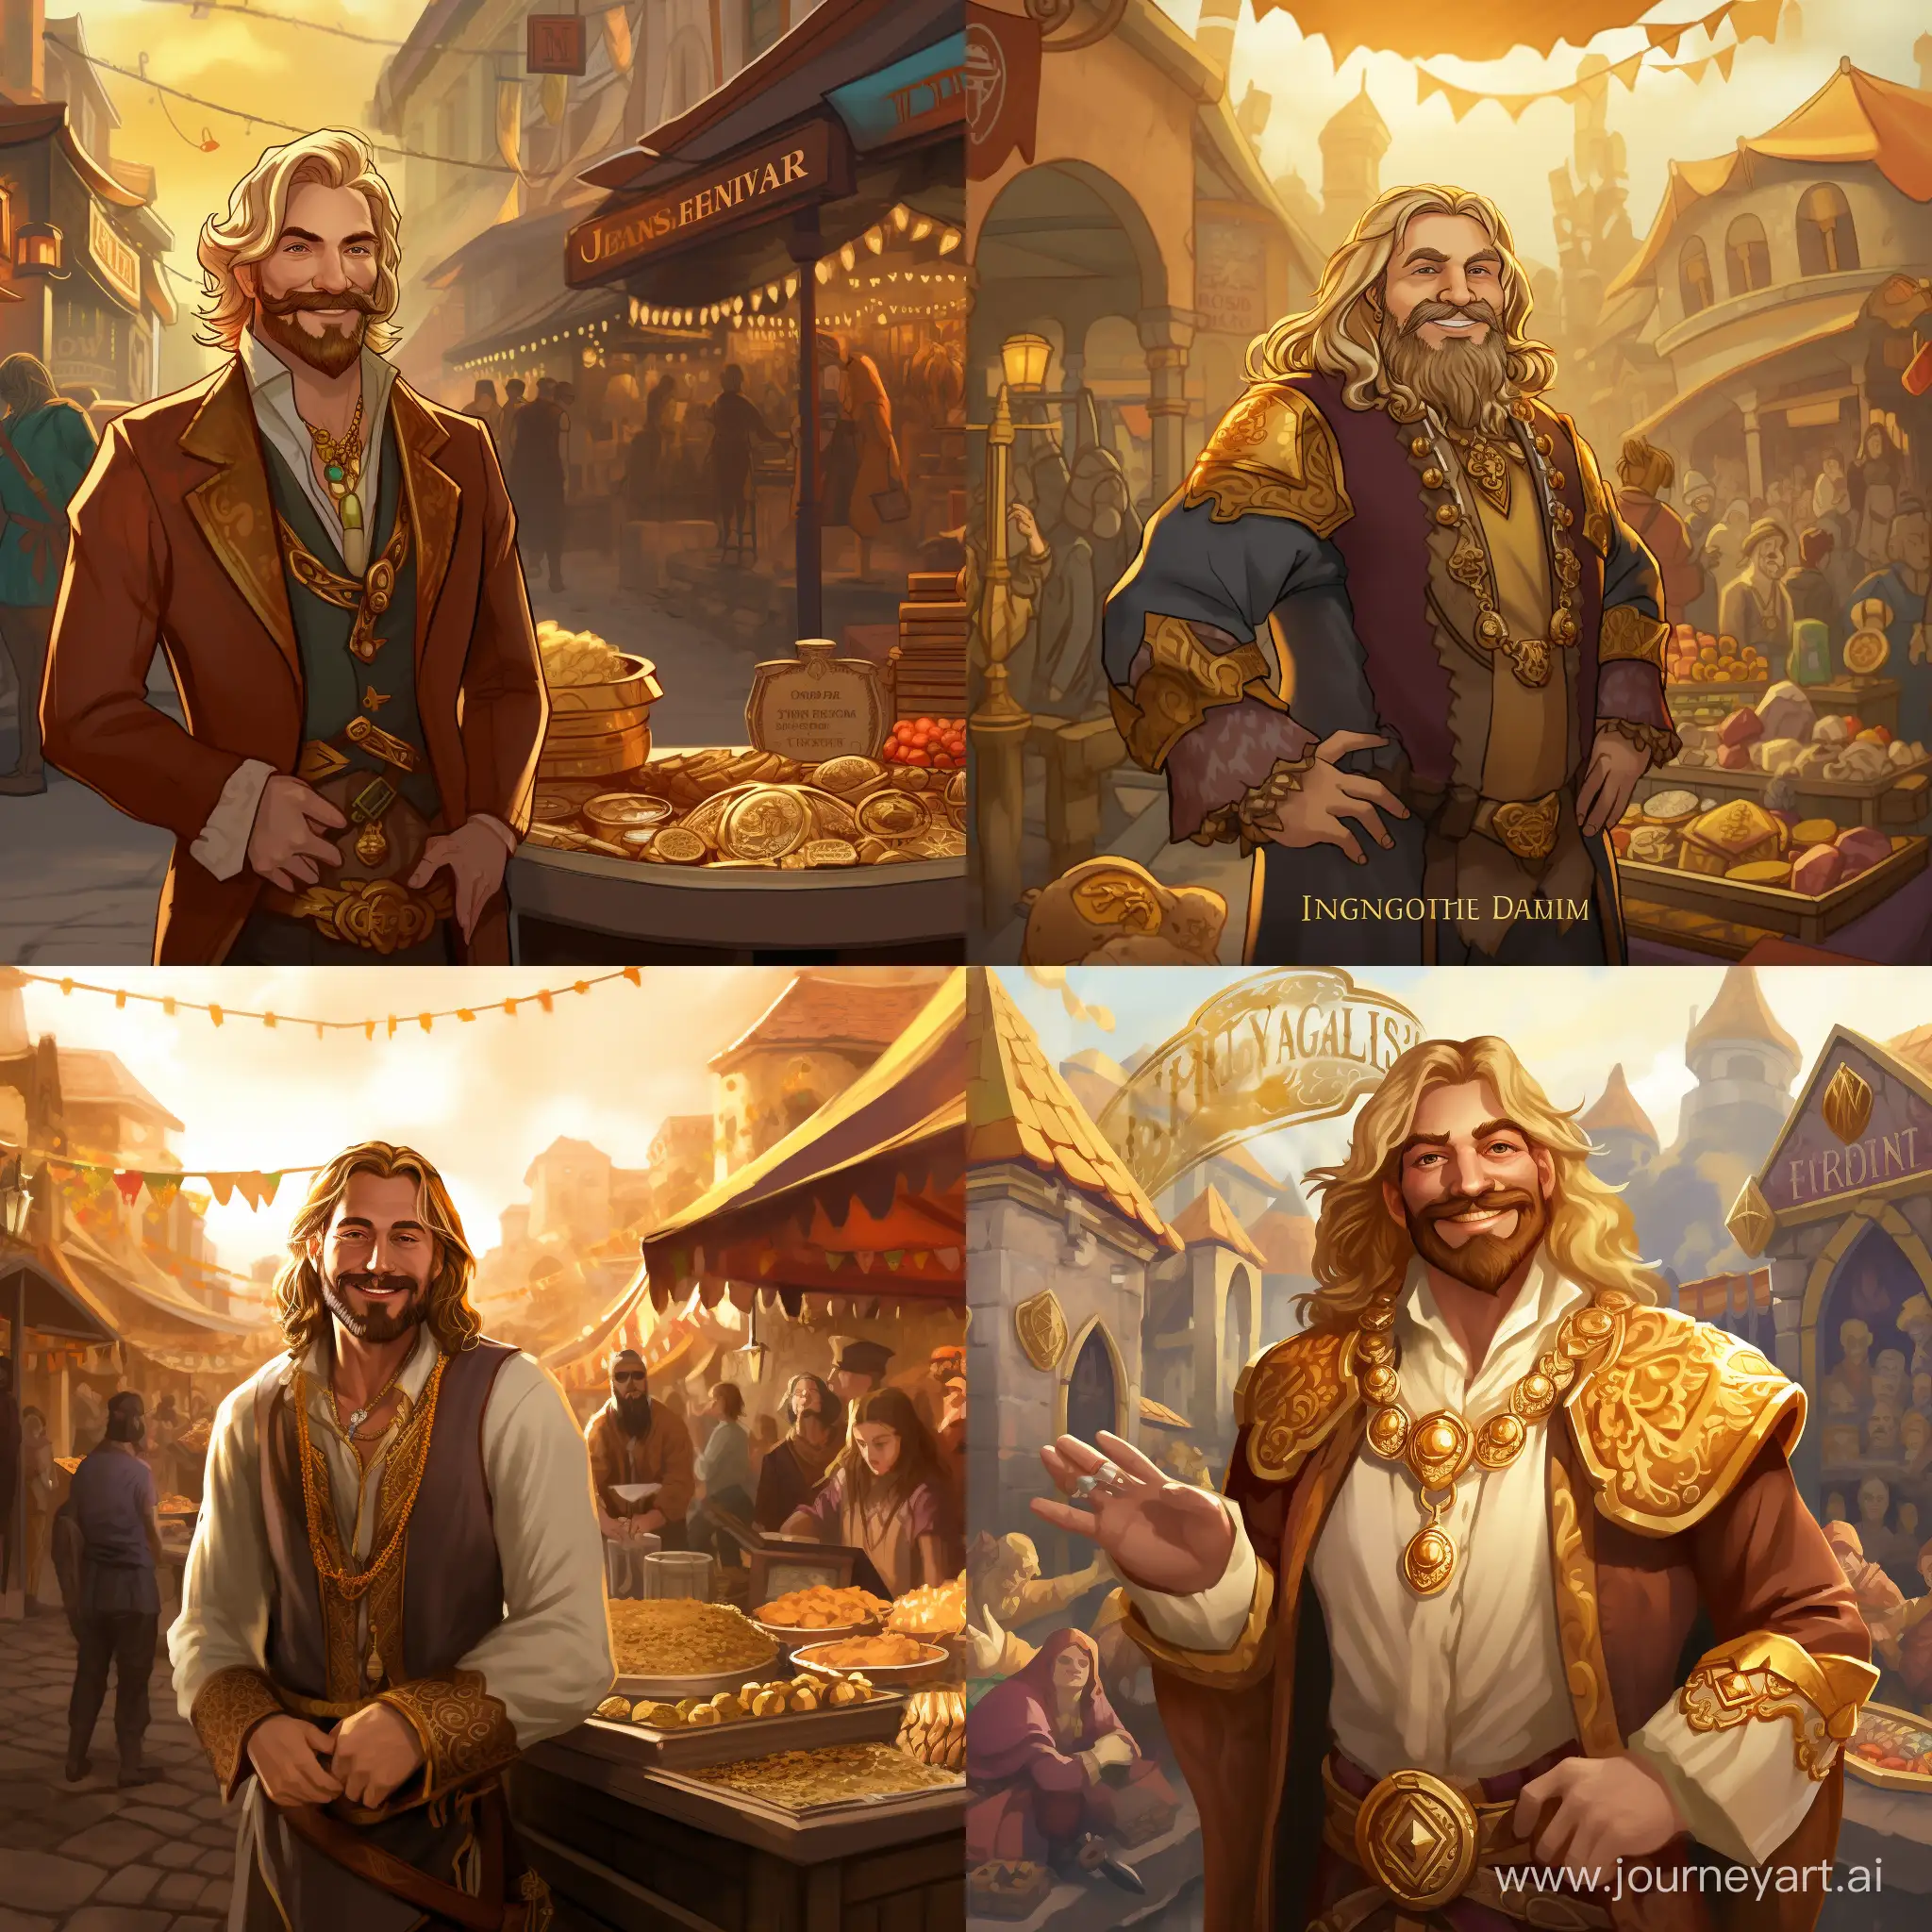 Draw me a concept art of a Viking trader who has long blond hair and a long beard with a mustache. 
He is 35 years old and looks young. Almost every finger has a ring with a precious stone. He is dressed in expensive clothes and wears gold rings with stones. Smiling. In the background there is a market where people reach for him with their hands